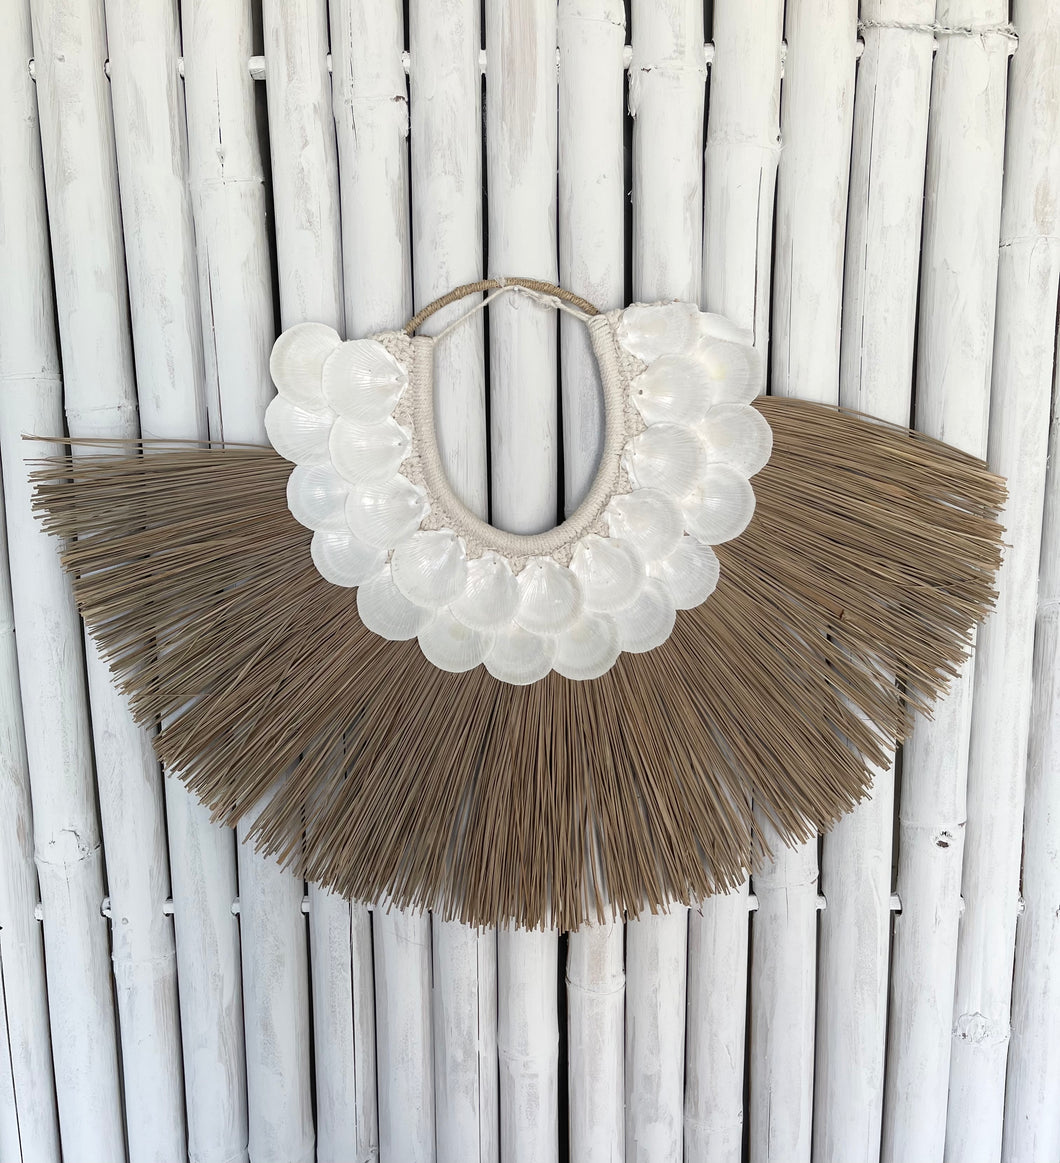 Coral shell & seagrass wall hanging display